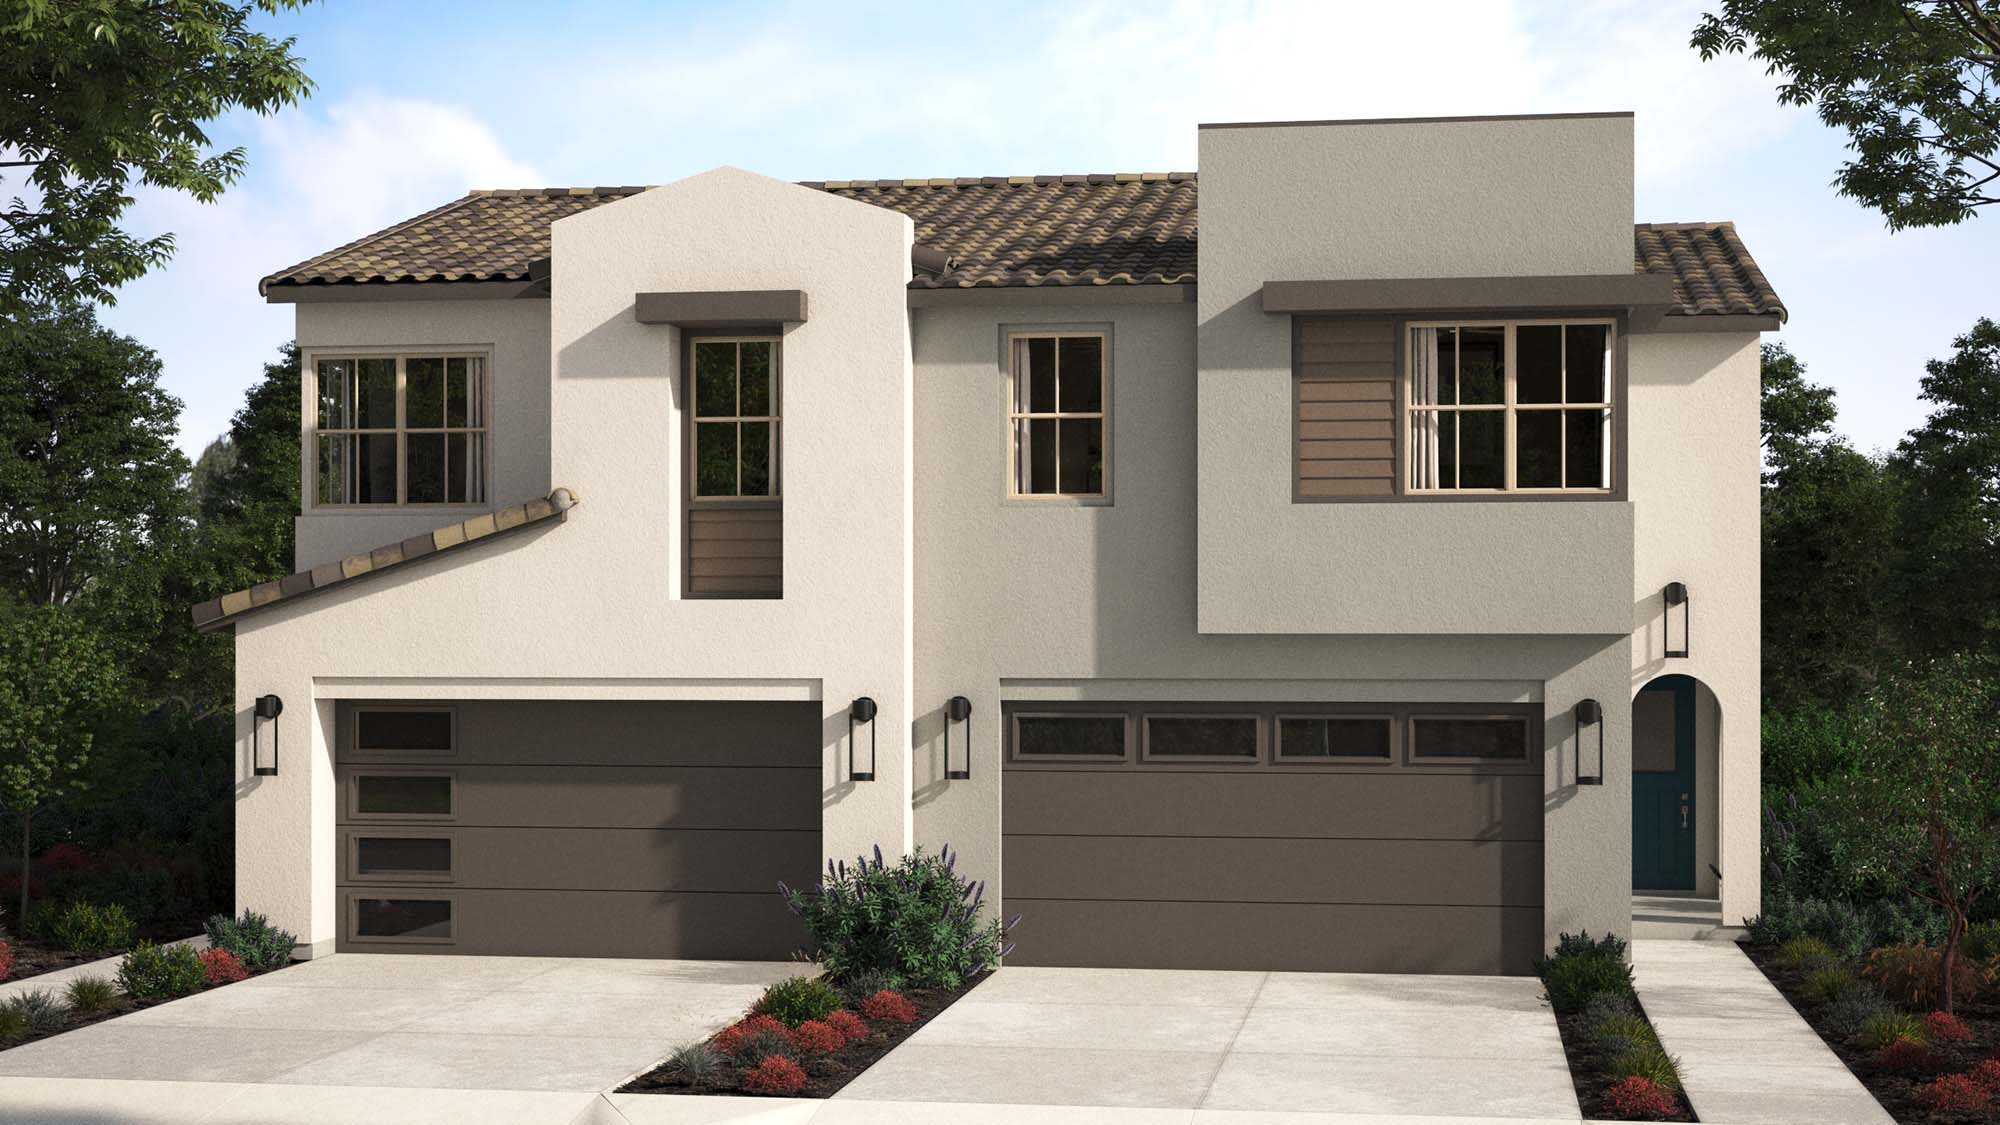 Exterior | Plan Two & Plan Three | Clementine at Narra Hills | New Homes in North Fontana, CA | Landsea Homes